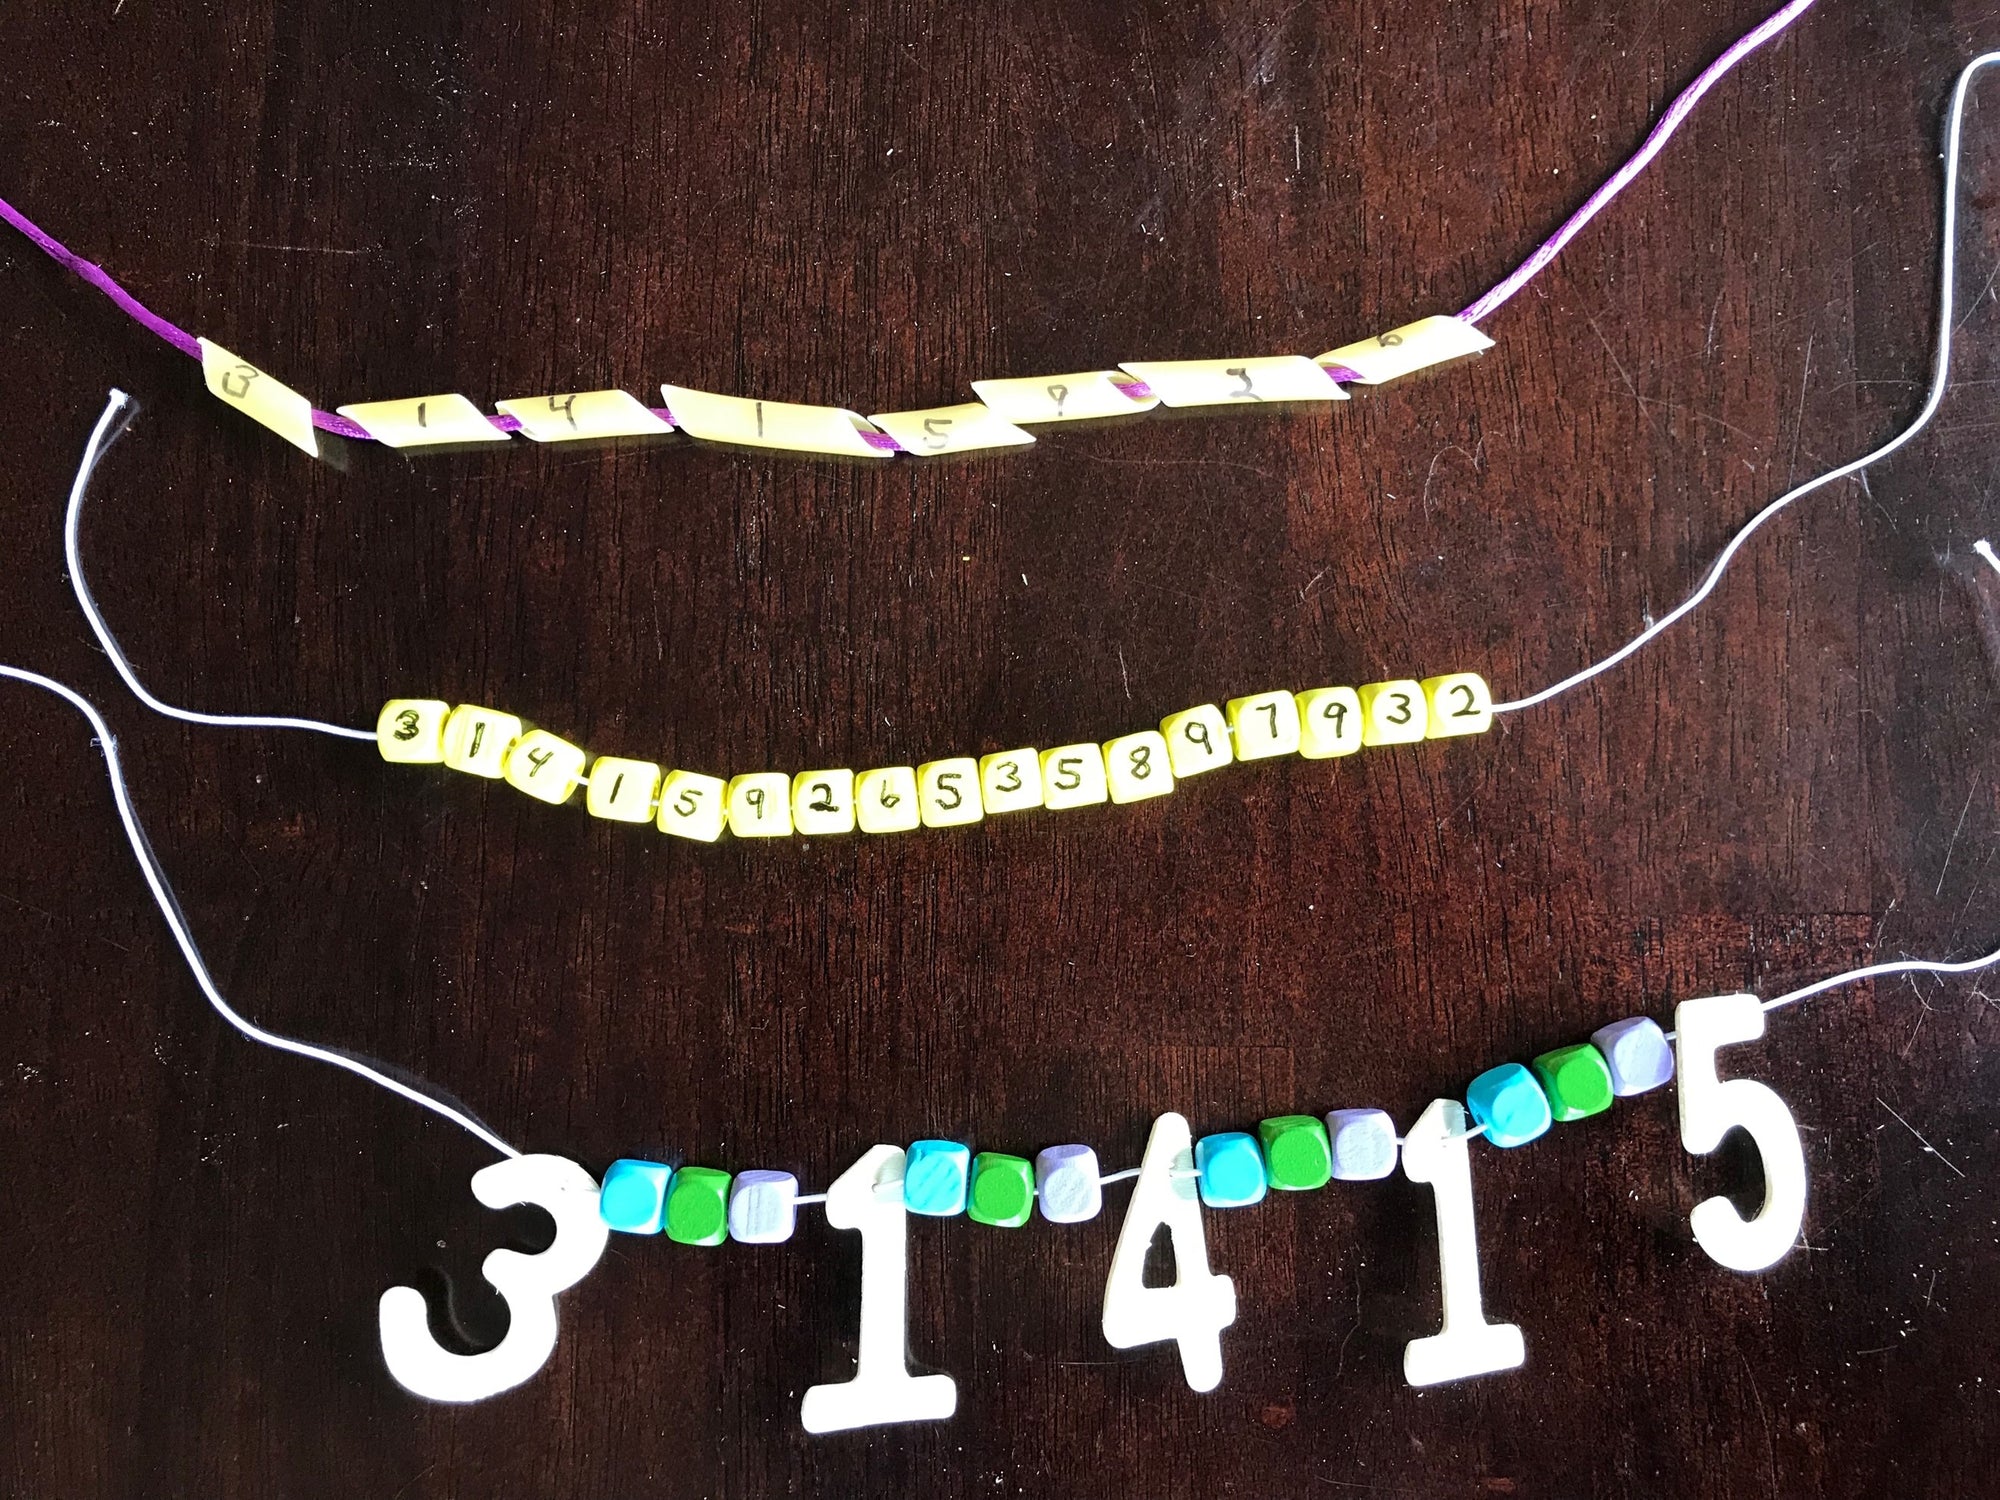 I Spy a LOT of Numbers - Make a Pi Necklace Activity